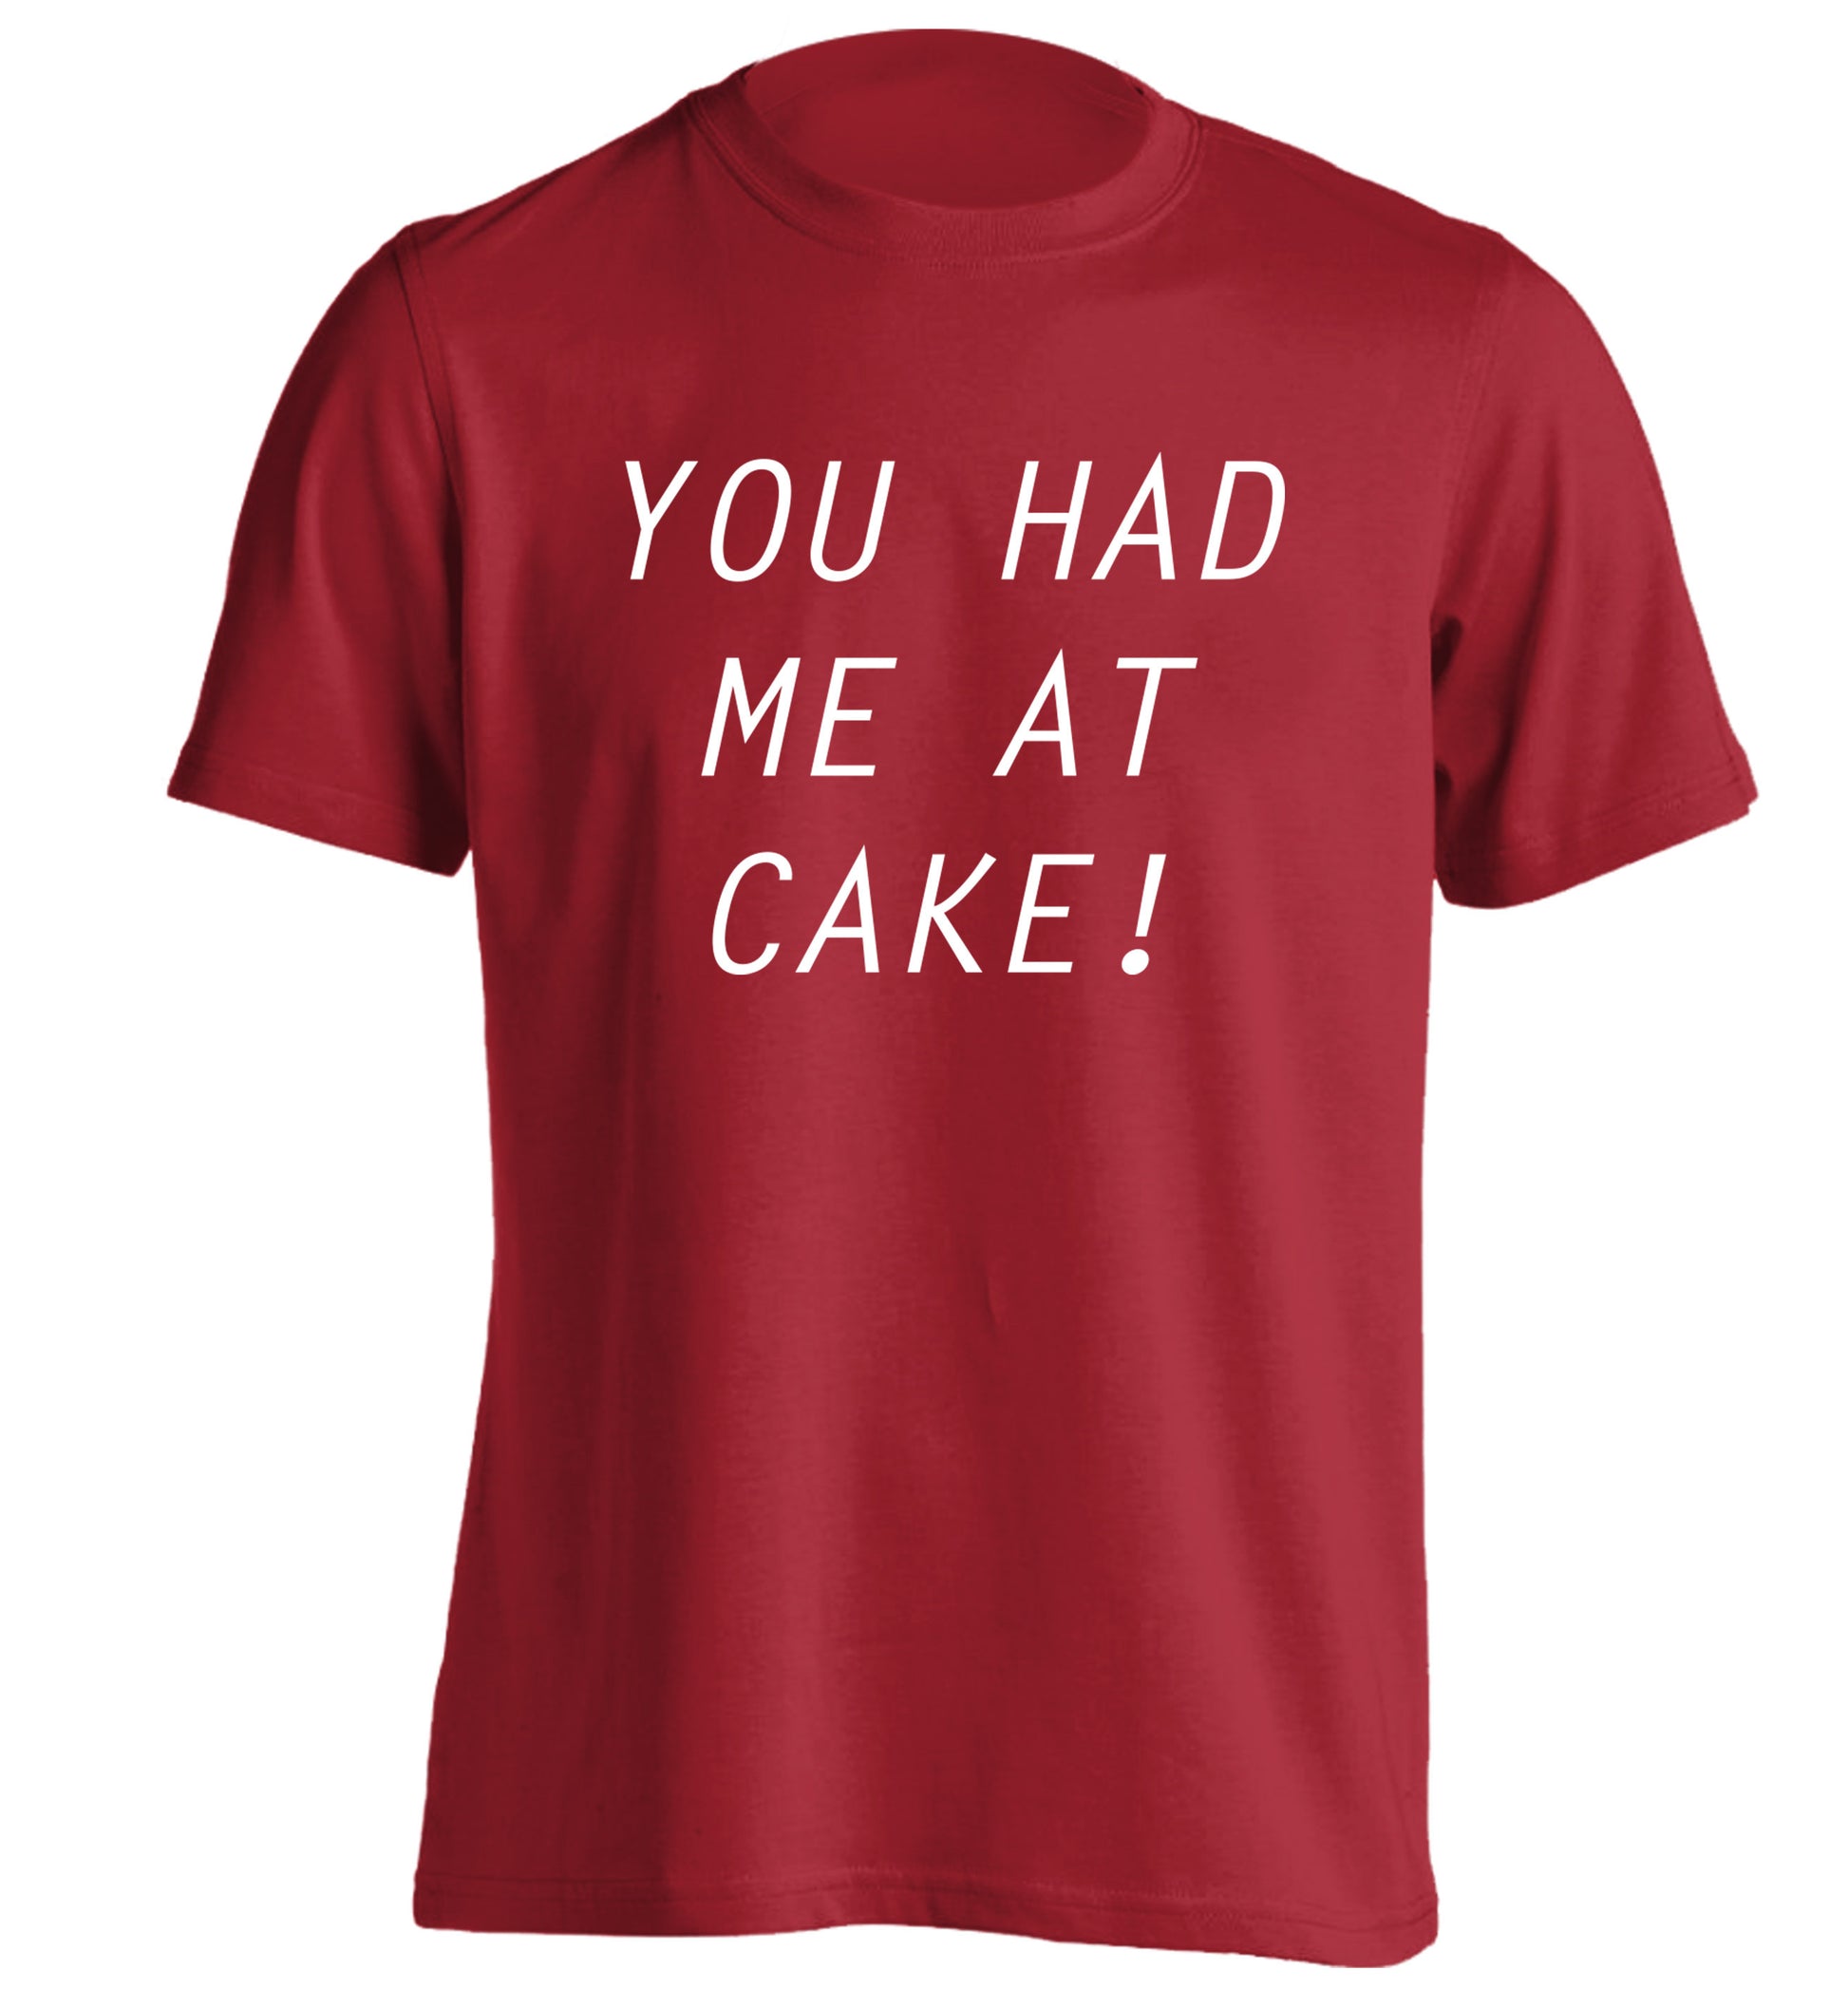 You had me at cake adults unisex red Tshirt 2XL